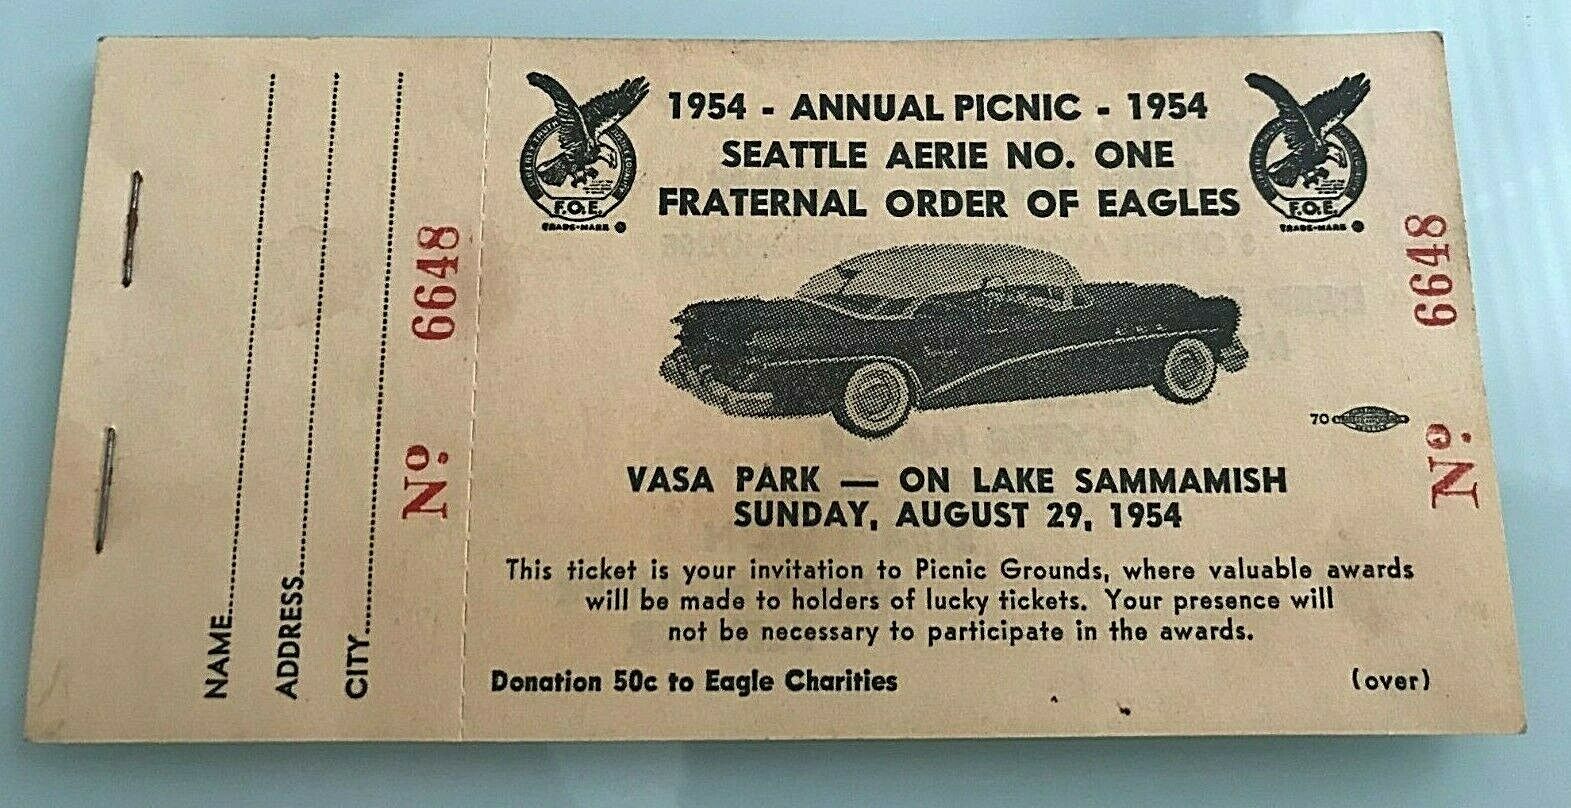 1954 Annual Picnic Seattle Aerie No1 FRATERNAL ORDER OF EAGLES RAFFLE 1954 BUICK